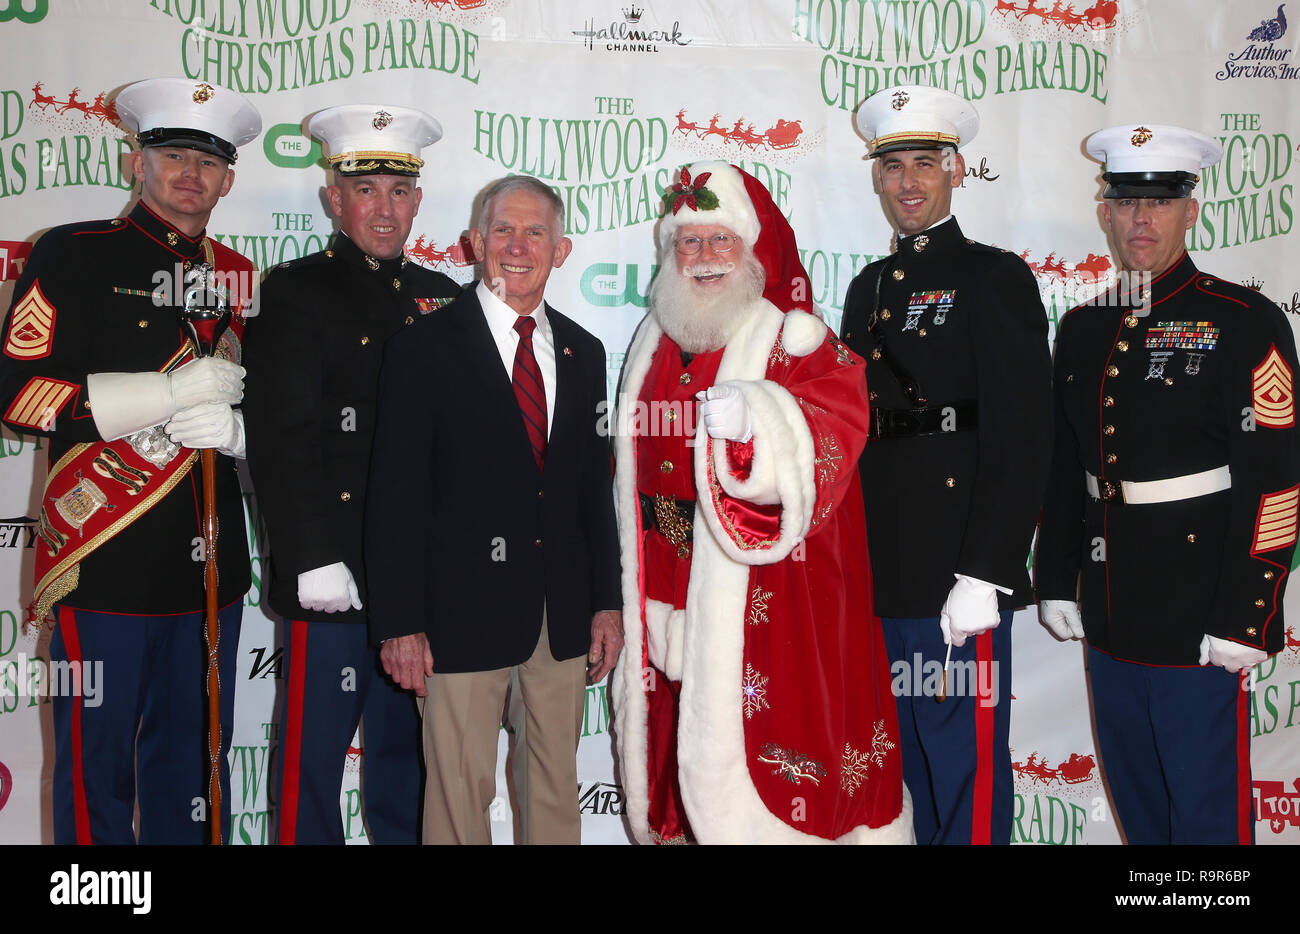 87th Annual Hollywood Christmas Parade  Featuring: Lieutenant General Pete Osman, Lieutenant Colonel Matthew McDonald, First Sergeant Bill Holodnak, Santa Claus Where: Hollywood, California, United States When: 25 Nov 2018 Credit: FayesVision/WENN.com Stock Photo